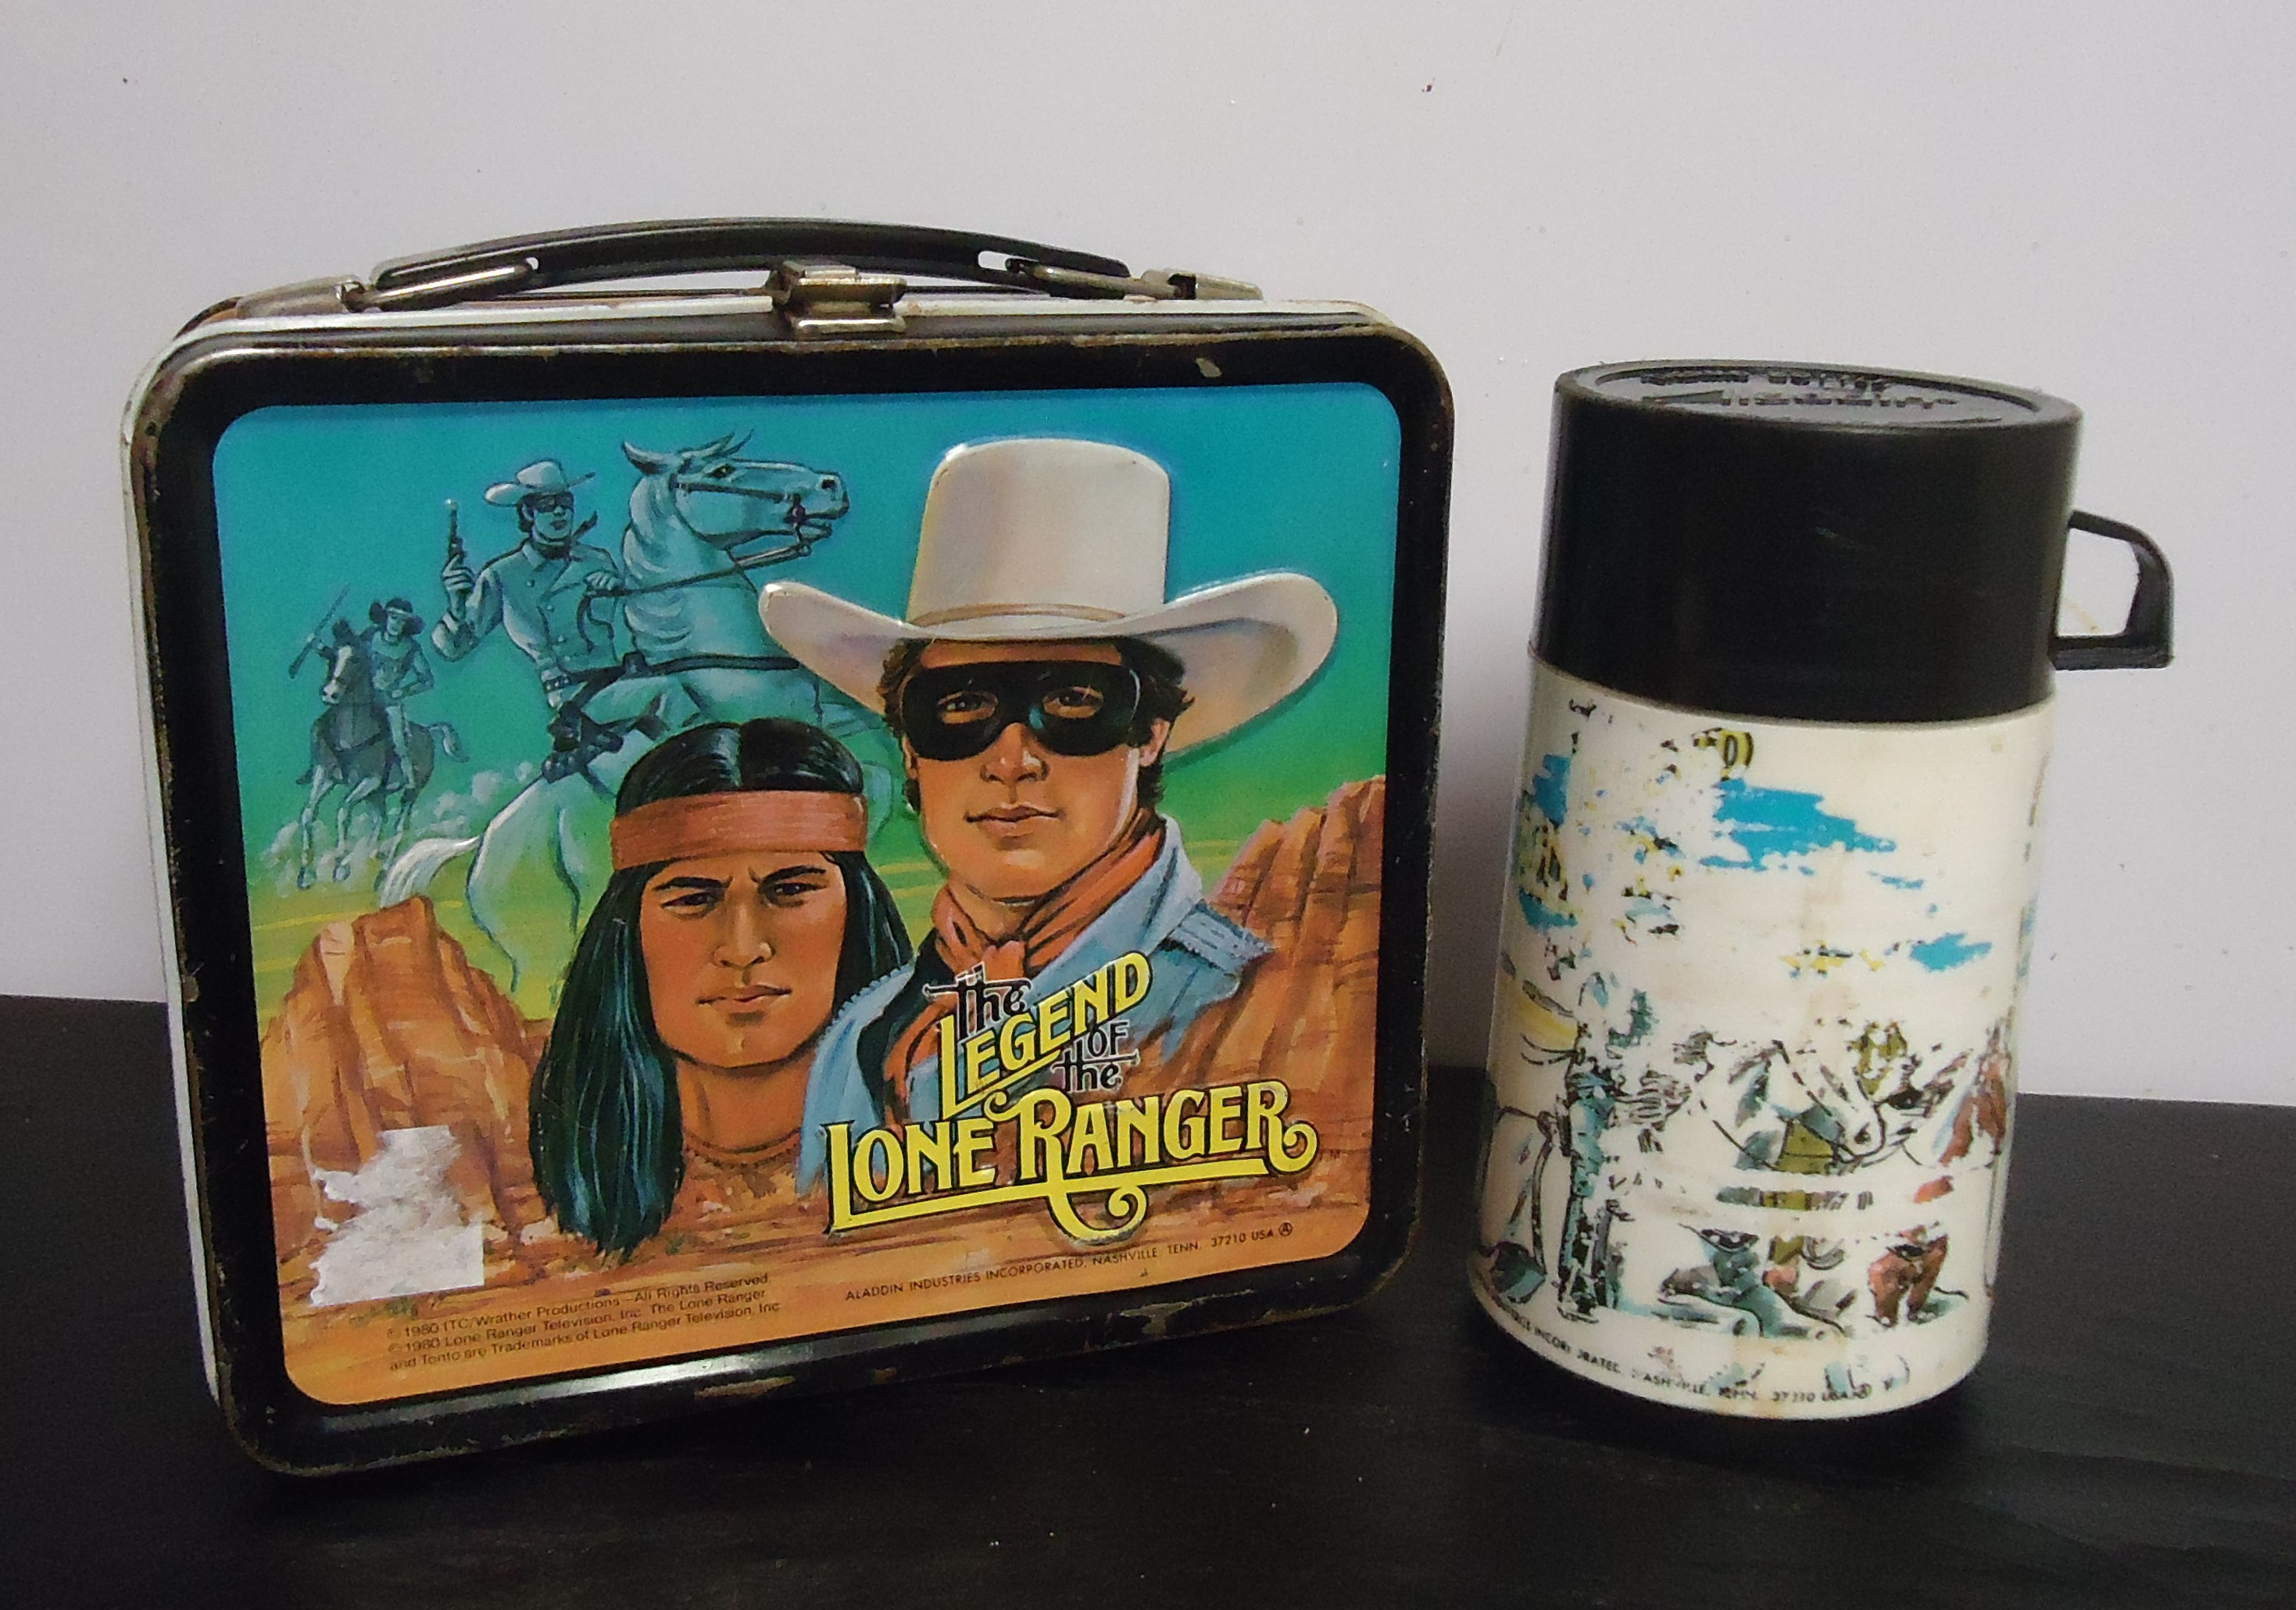 (17) "The Lone Ranger" Metal Lunch Box
W/ Thermos
$50.00